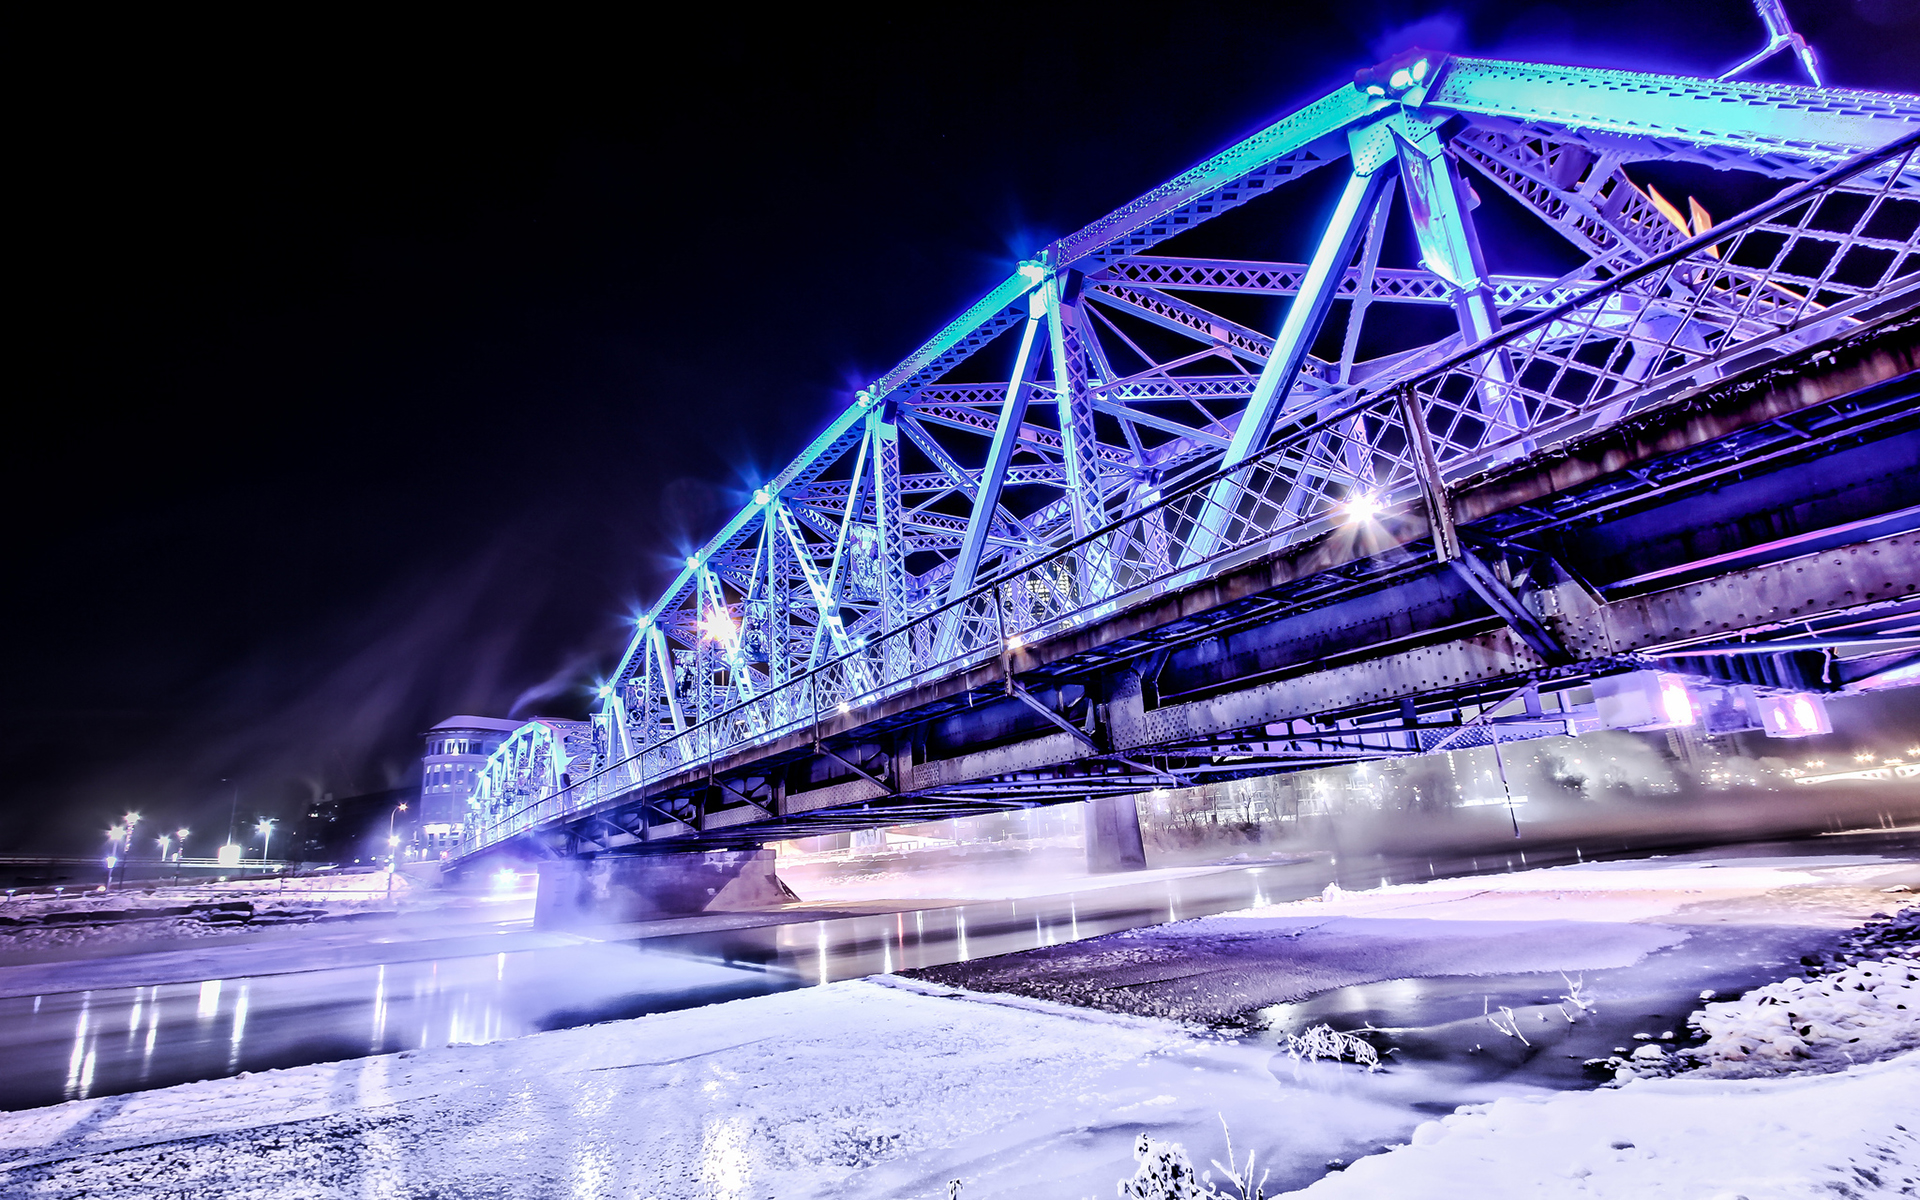 world, Architecture, Steel, Metal, Bridges, Roads, Structure, Lights, Purple, Blue, Night, Bright, Contrast, Rivers, Canal, Water, Winter, Snow, Cold, Seasons, Ice, Freezing Wallpaper